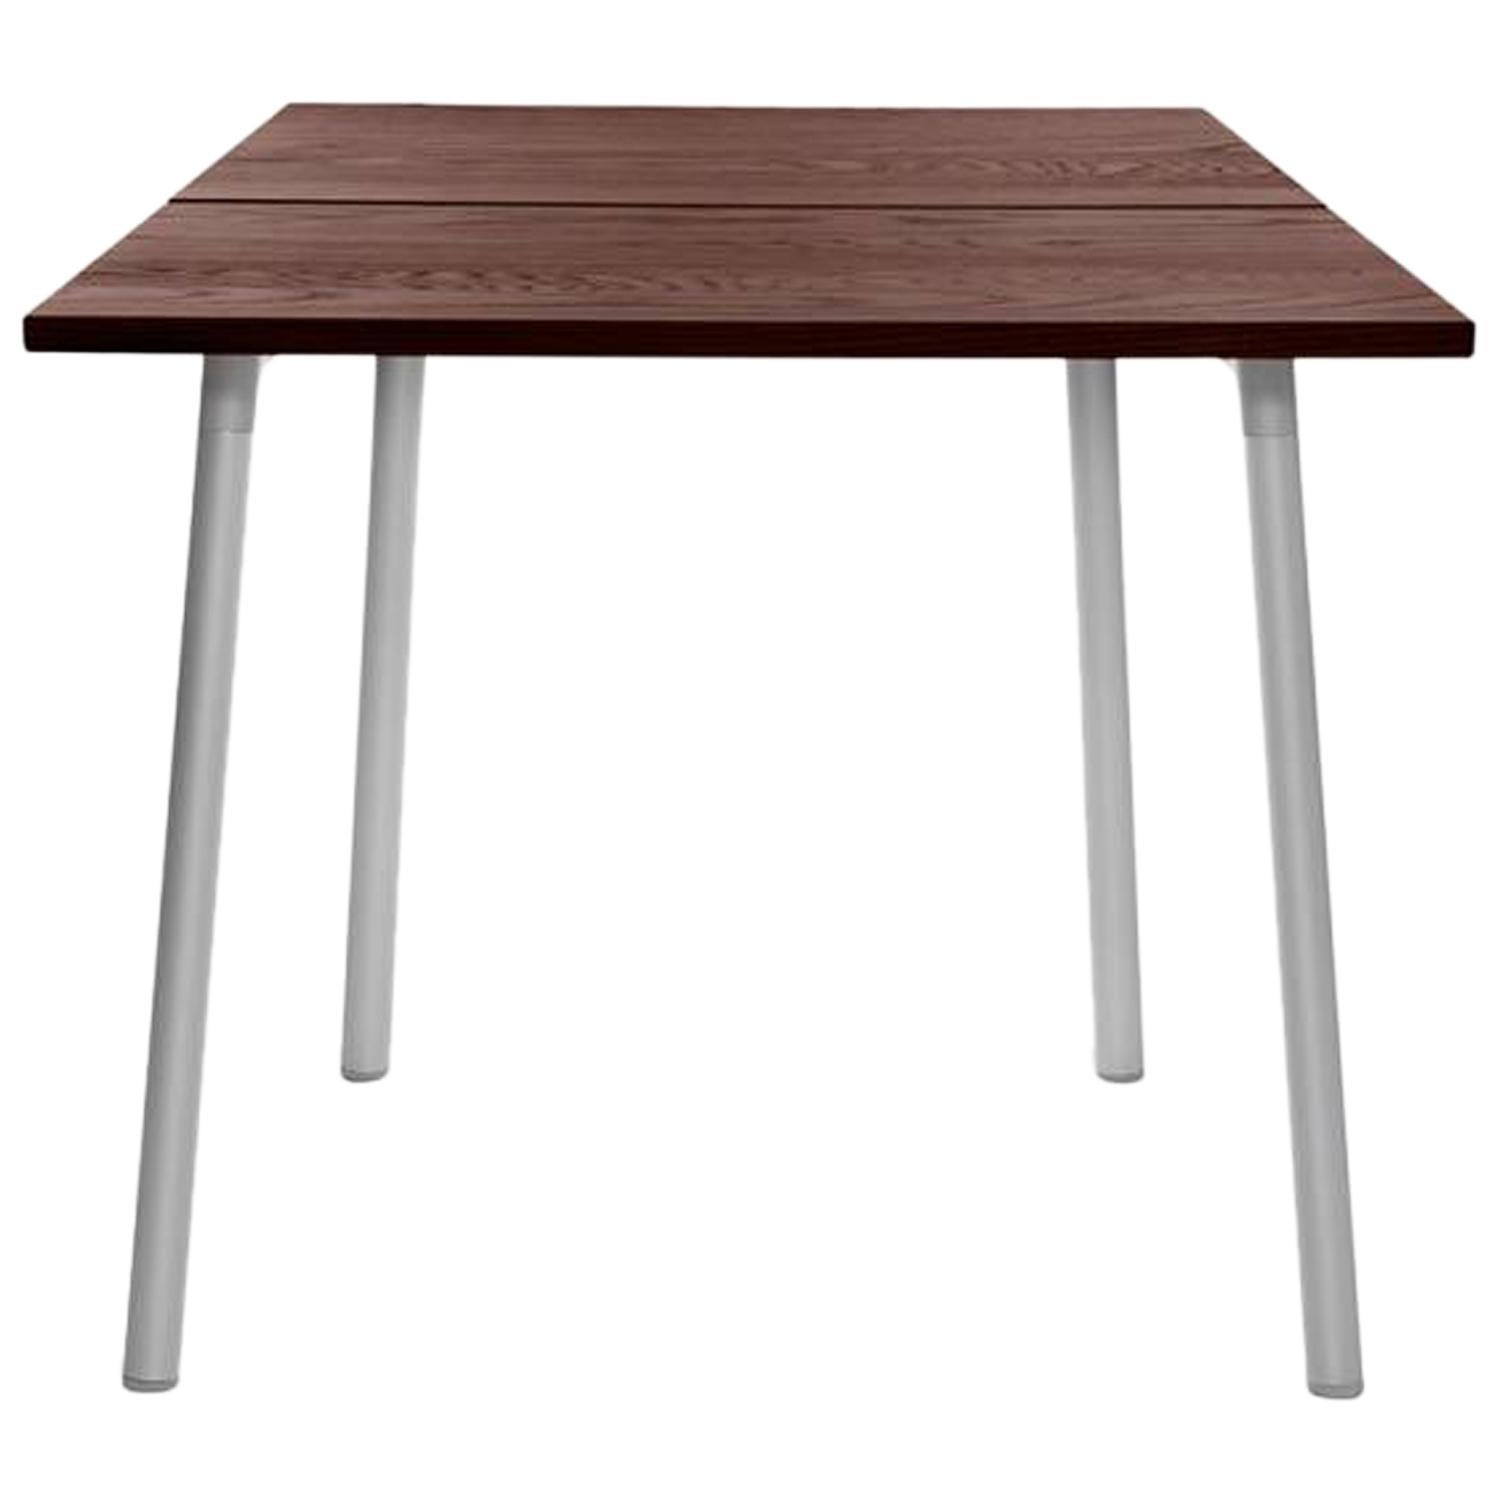 Emeco Run Small Table in Aluminum and Walnut by Sam Hecht & Kim Colin For Sale